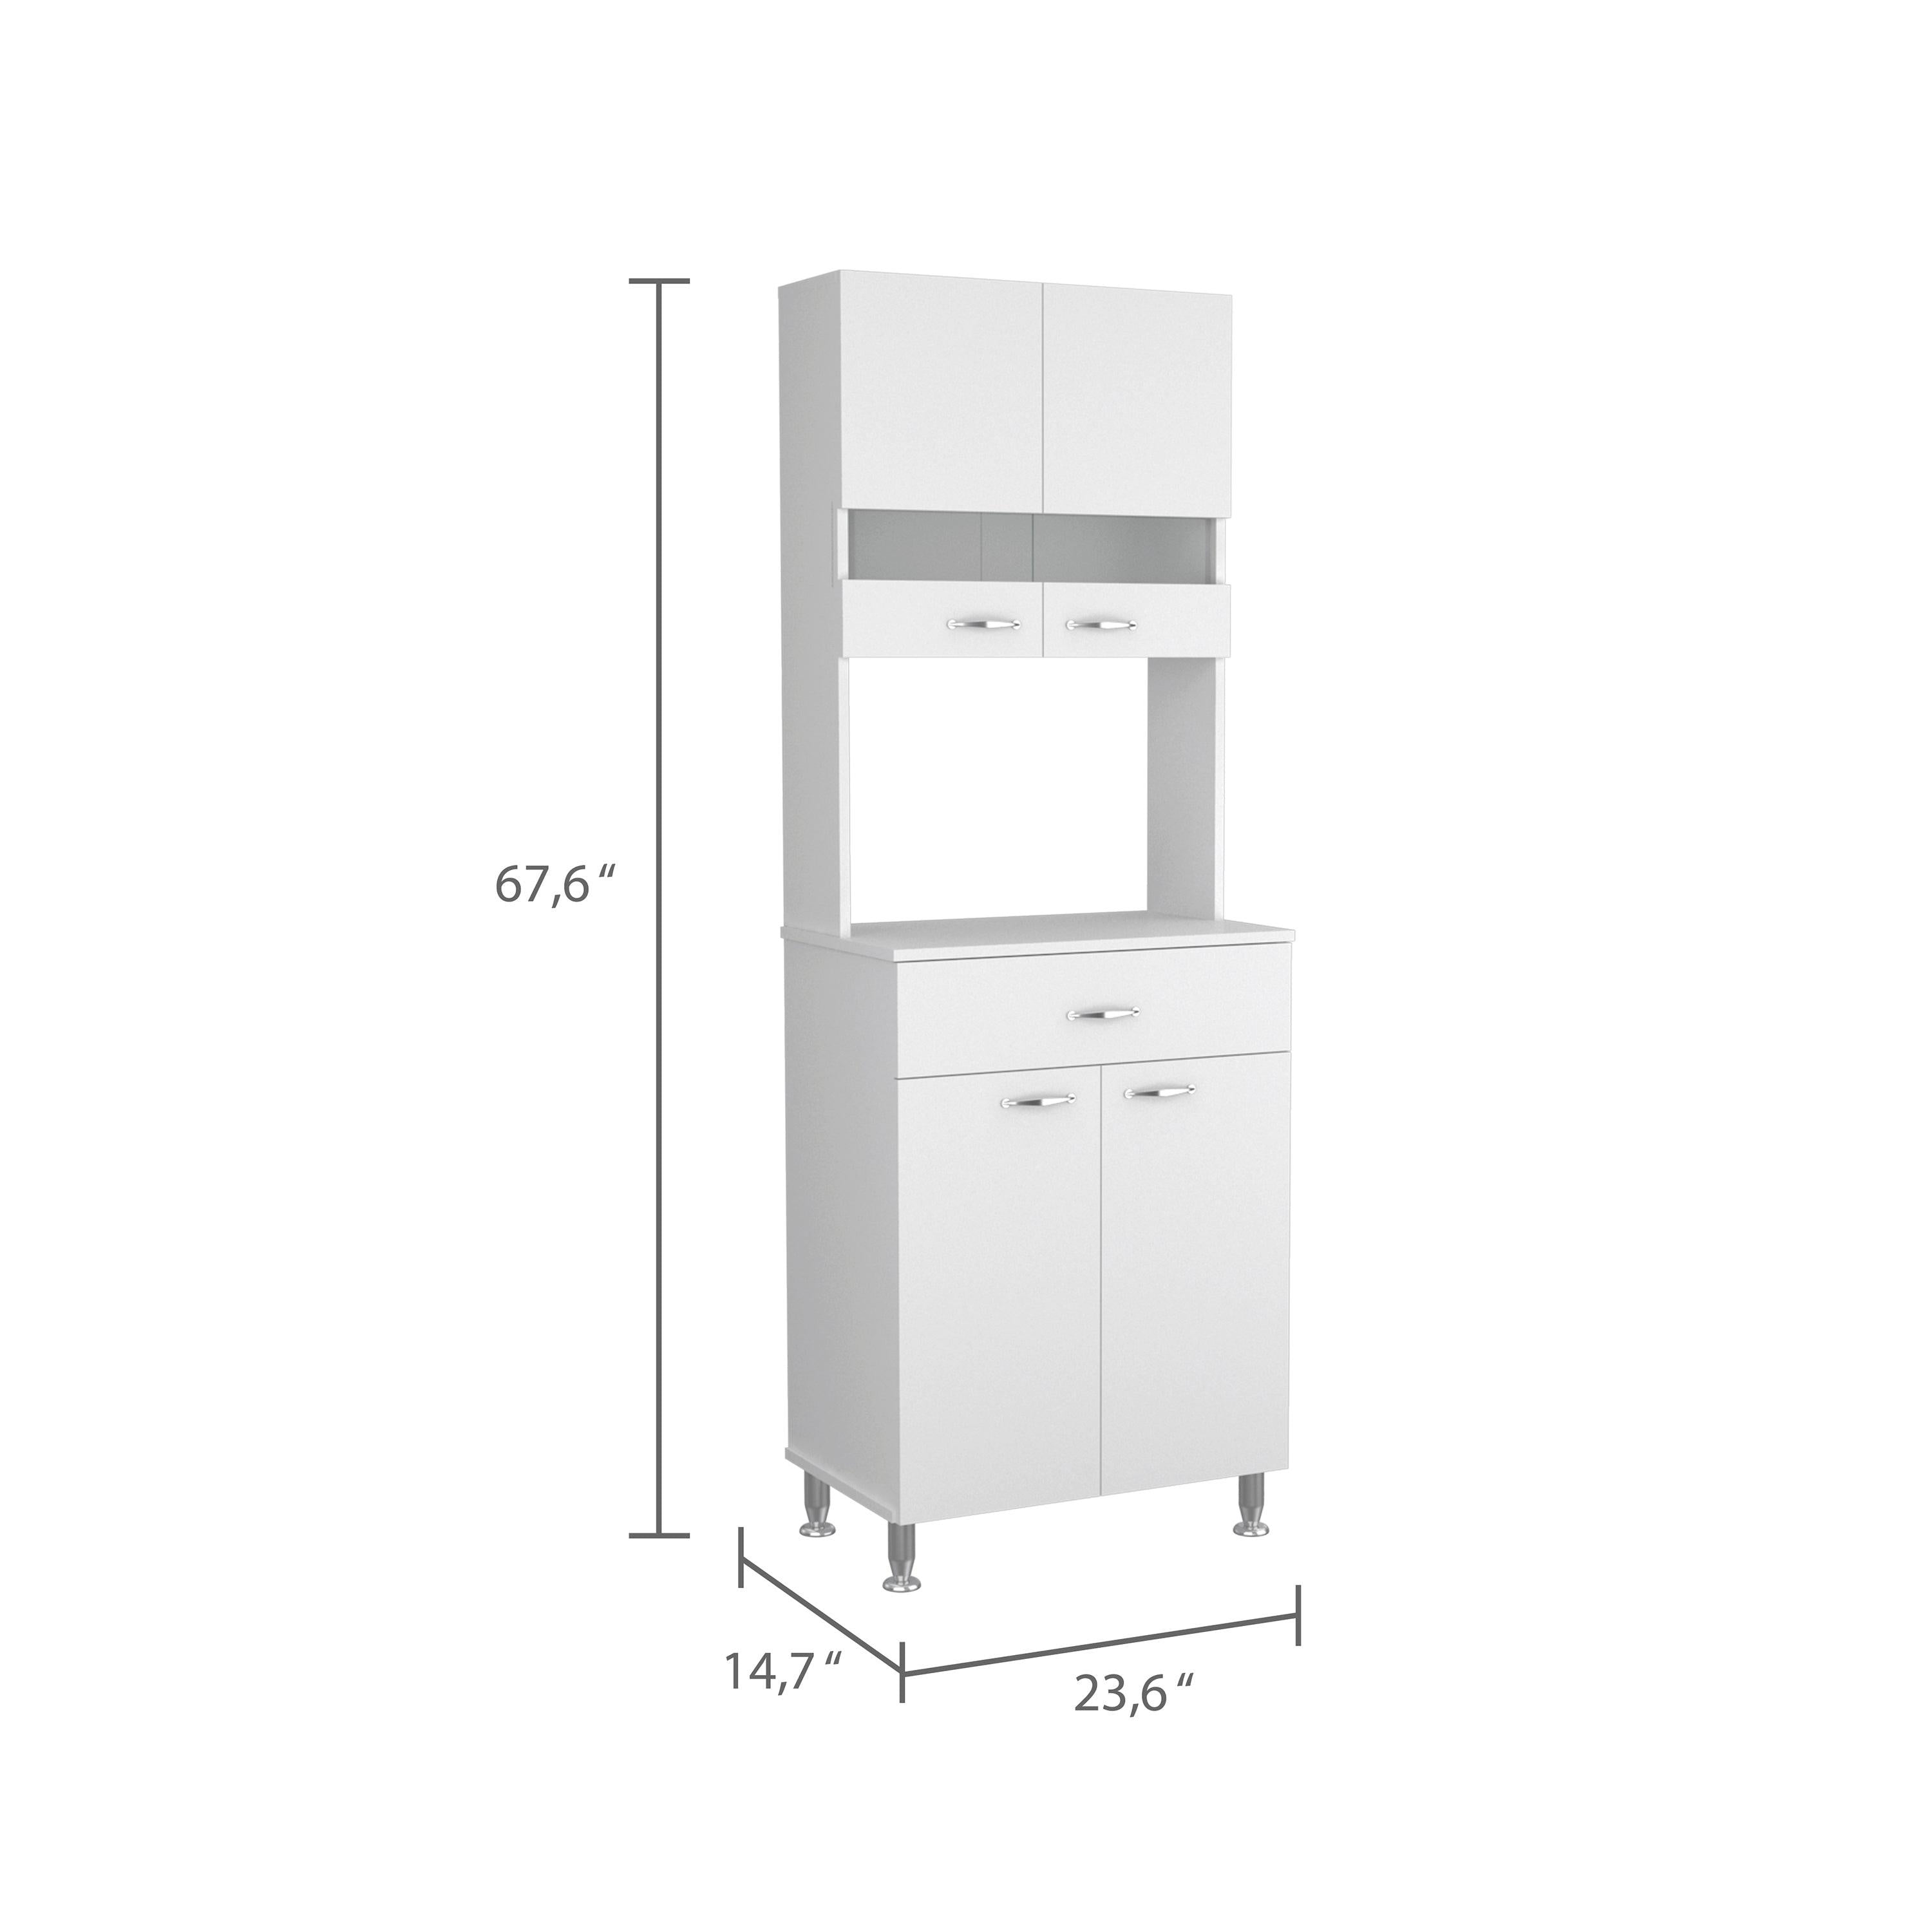 White Pantry Cabinet with Two Door Panels